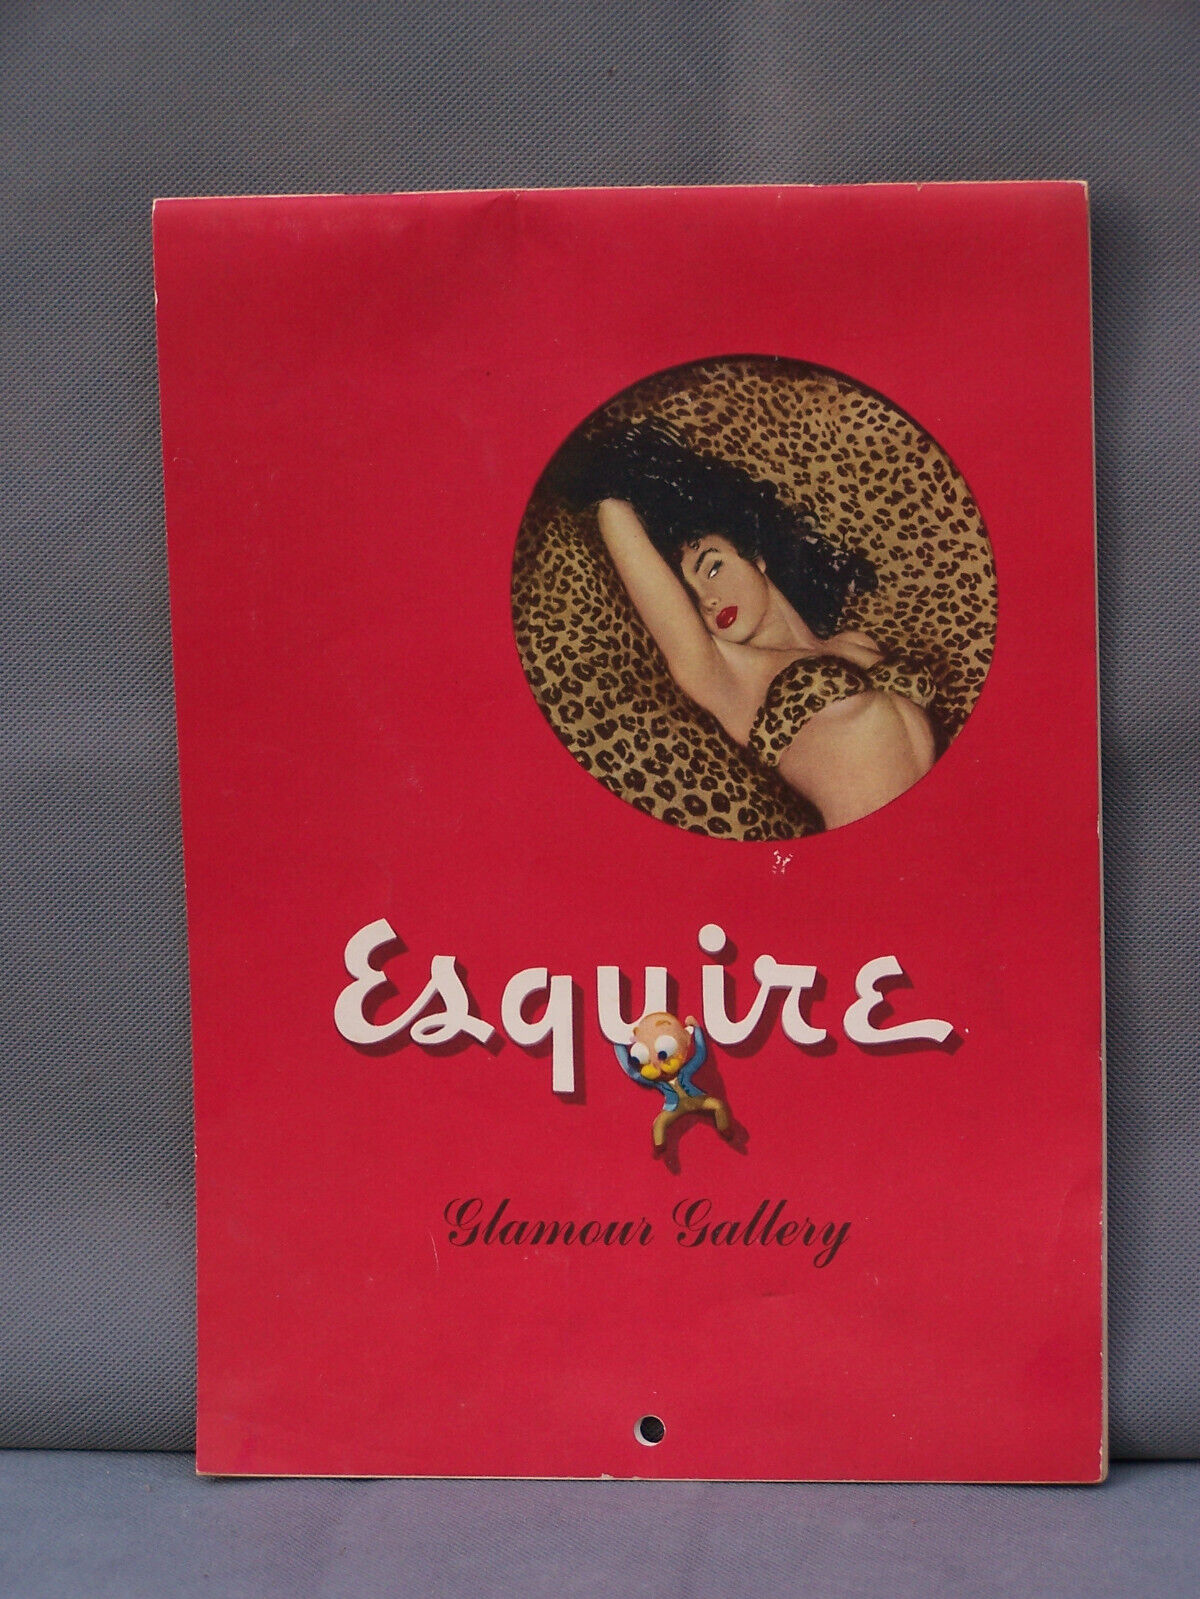 Vintage Esquire Glamour Gallery 1948 12 Month Calendar 8 1/2